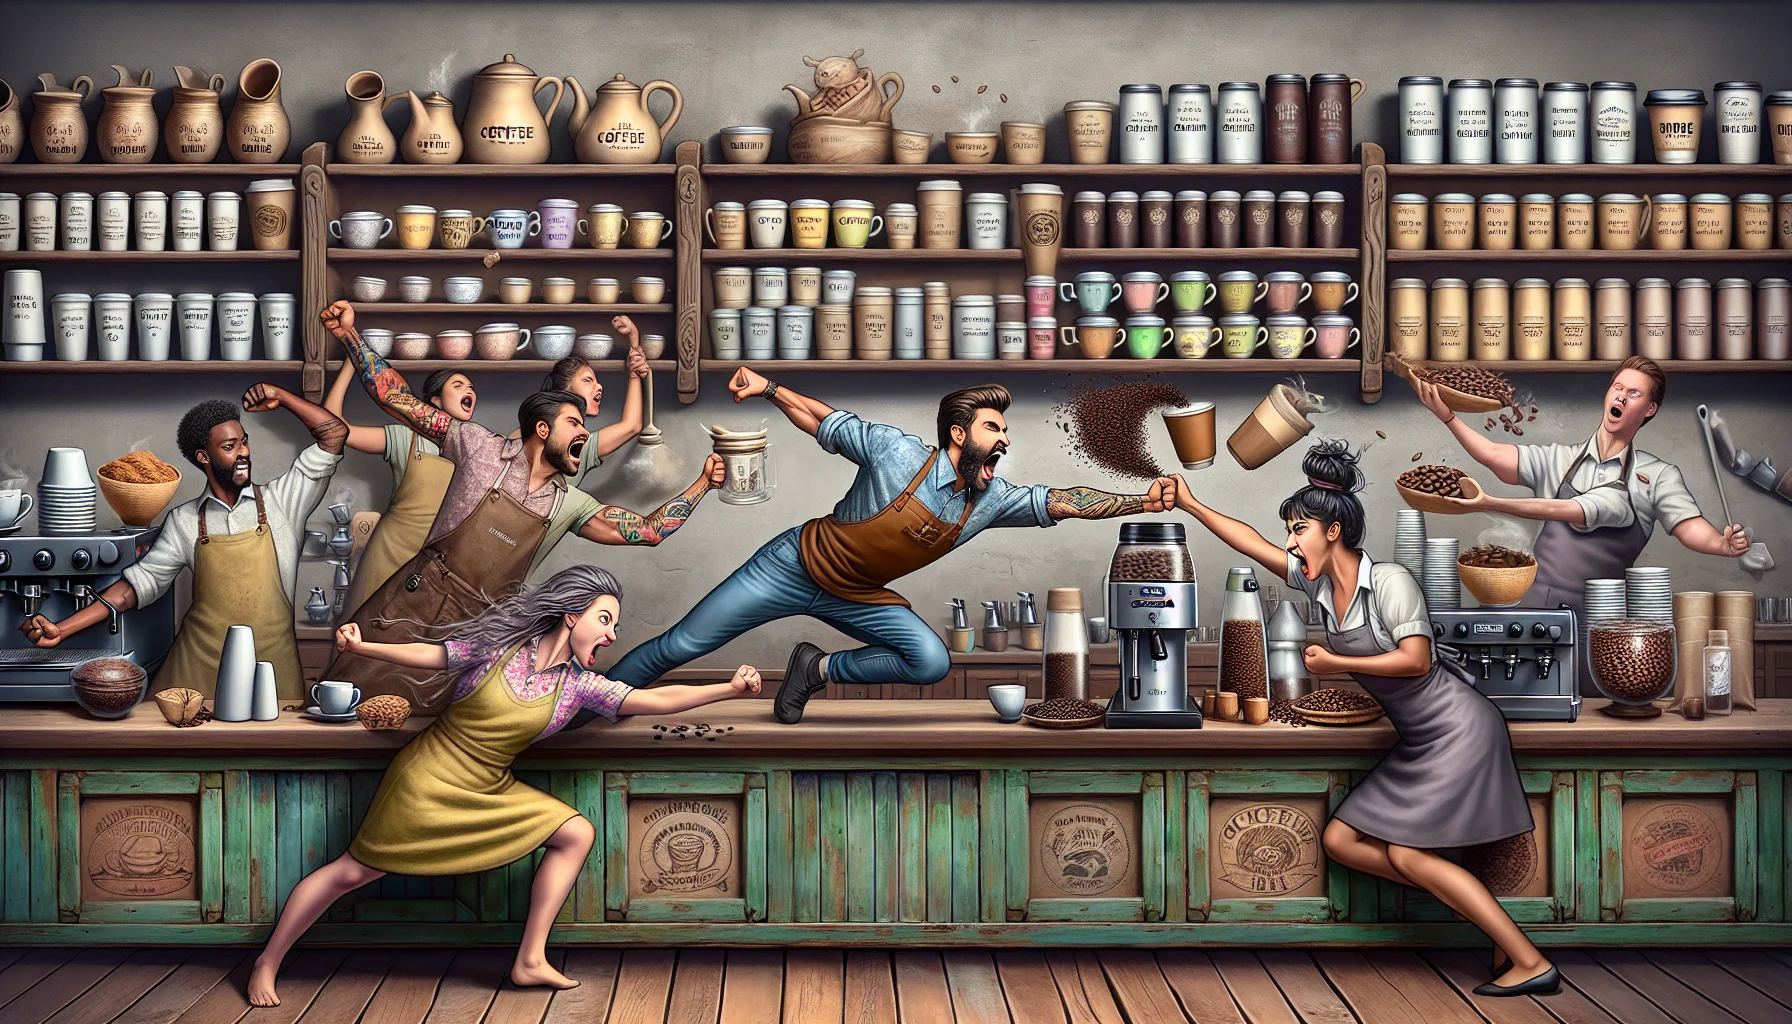 Create a detailed and vibrant image set in a lively local coffee shop named 'Coffee Bean'. Highlight an amusing scene where passionate baristas, one being a Caucasian male and the other a Hispanic female, are engaged in a playful competition, gracefully maneuvering around the compact space, brewing both coffee and tea with exaggerated enthusiasm. Include assorted tea and coffee products, each speckled with playful designs and labels, meticulously arranged on rustic wooden shelves. A humorous tone should be palpable through the facial expressions of the baristas and customers of varying descents and genders